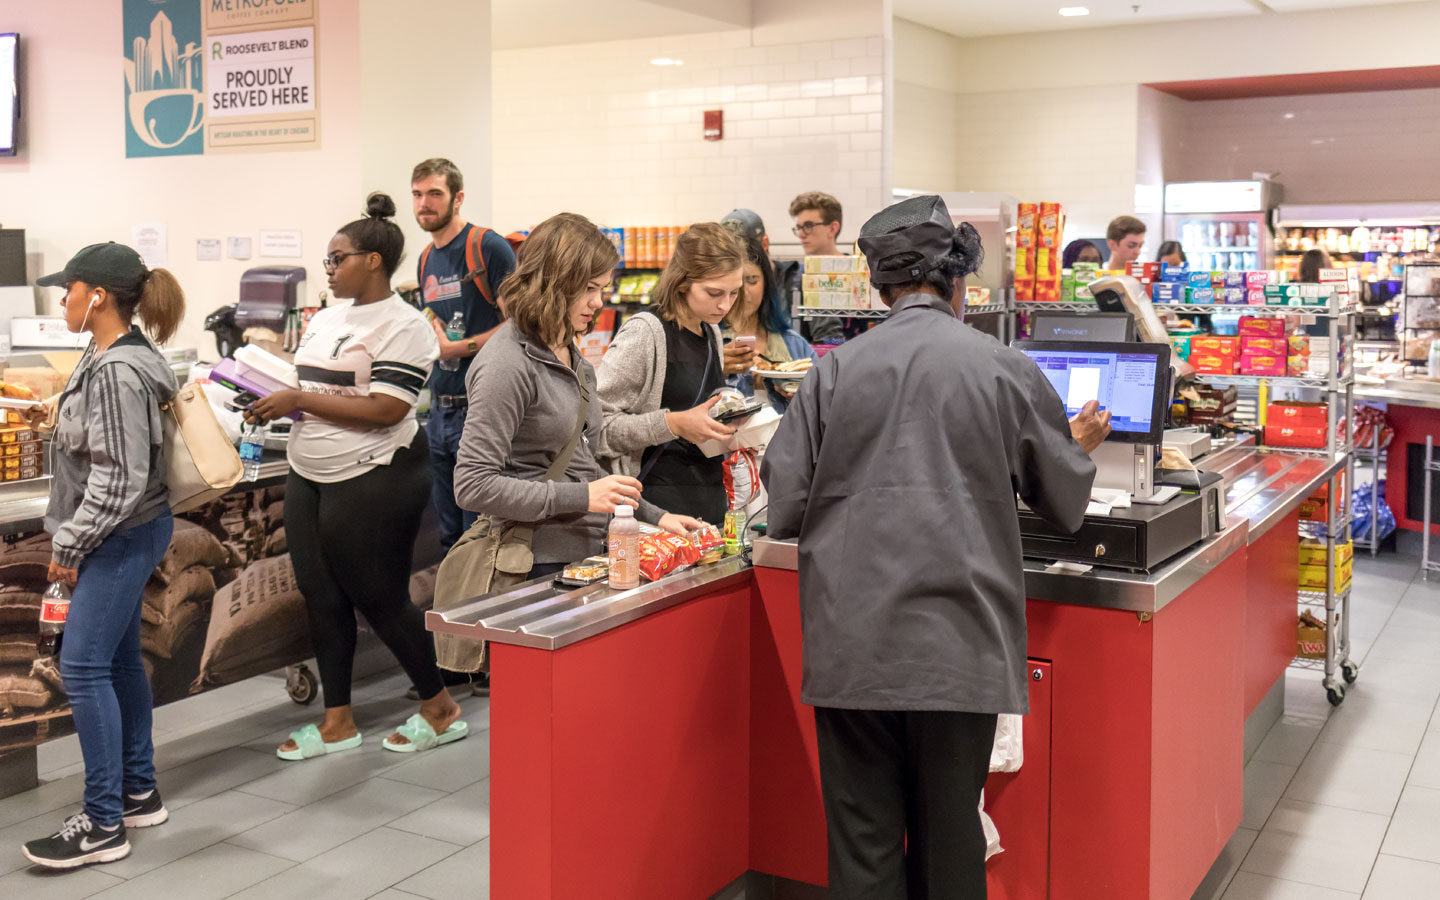 A view of students in dining center check out line purchasing food items.